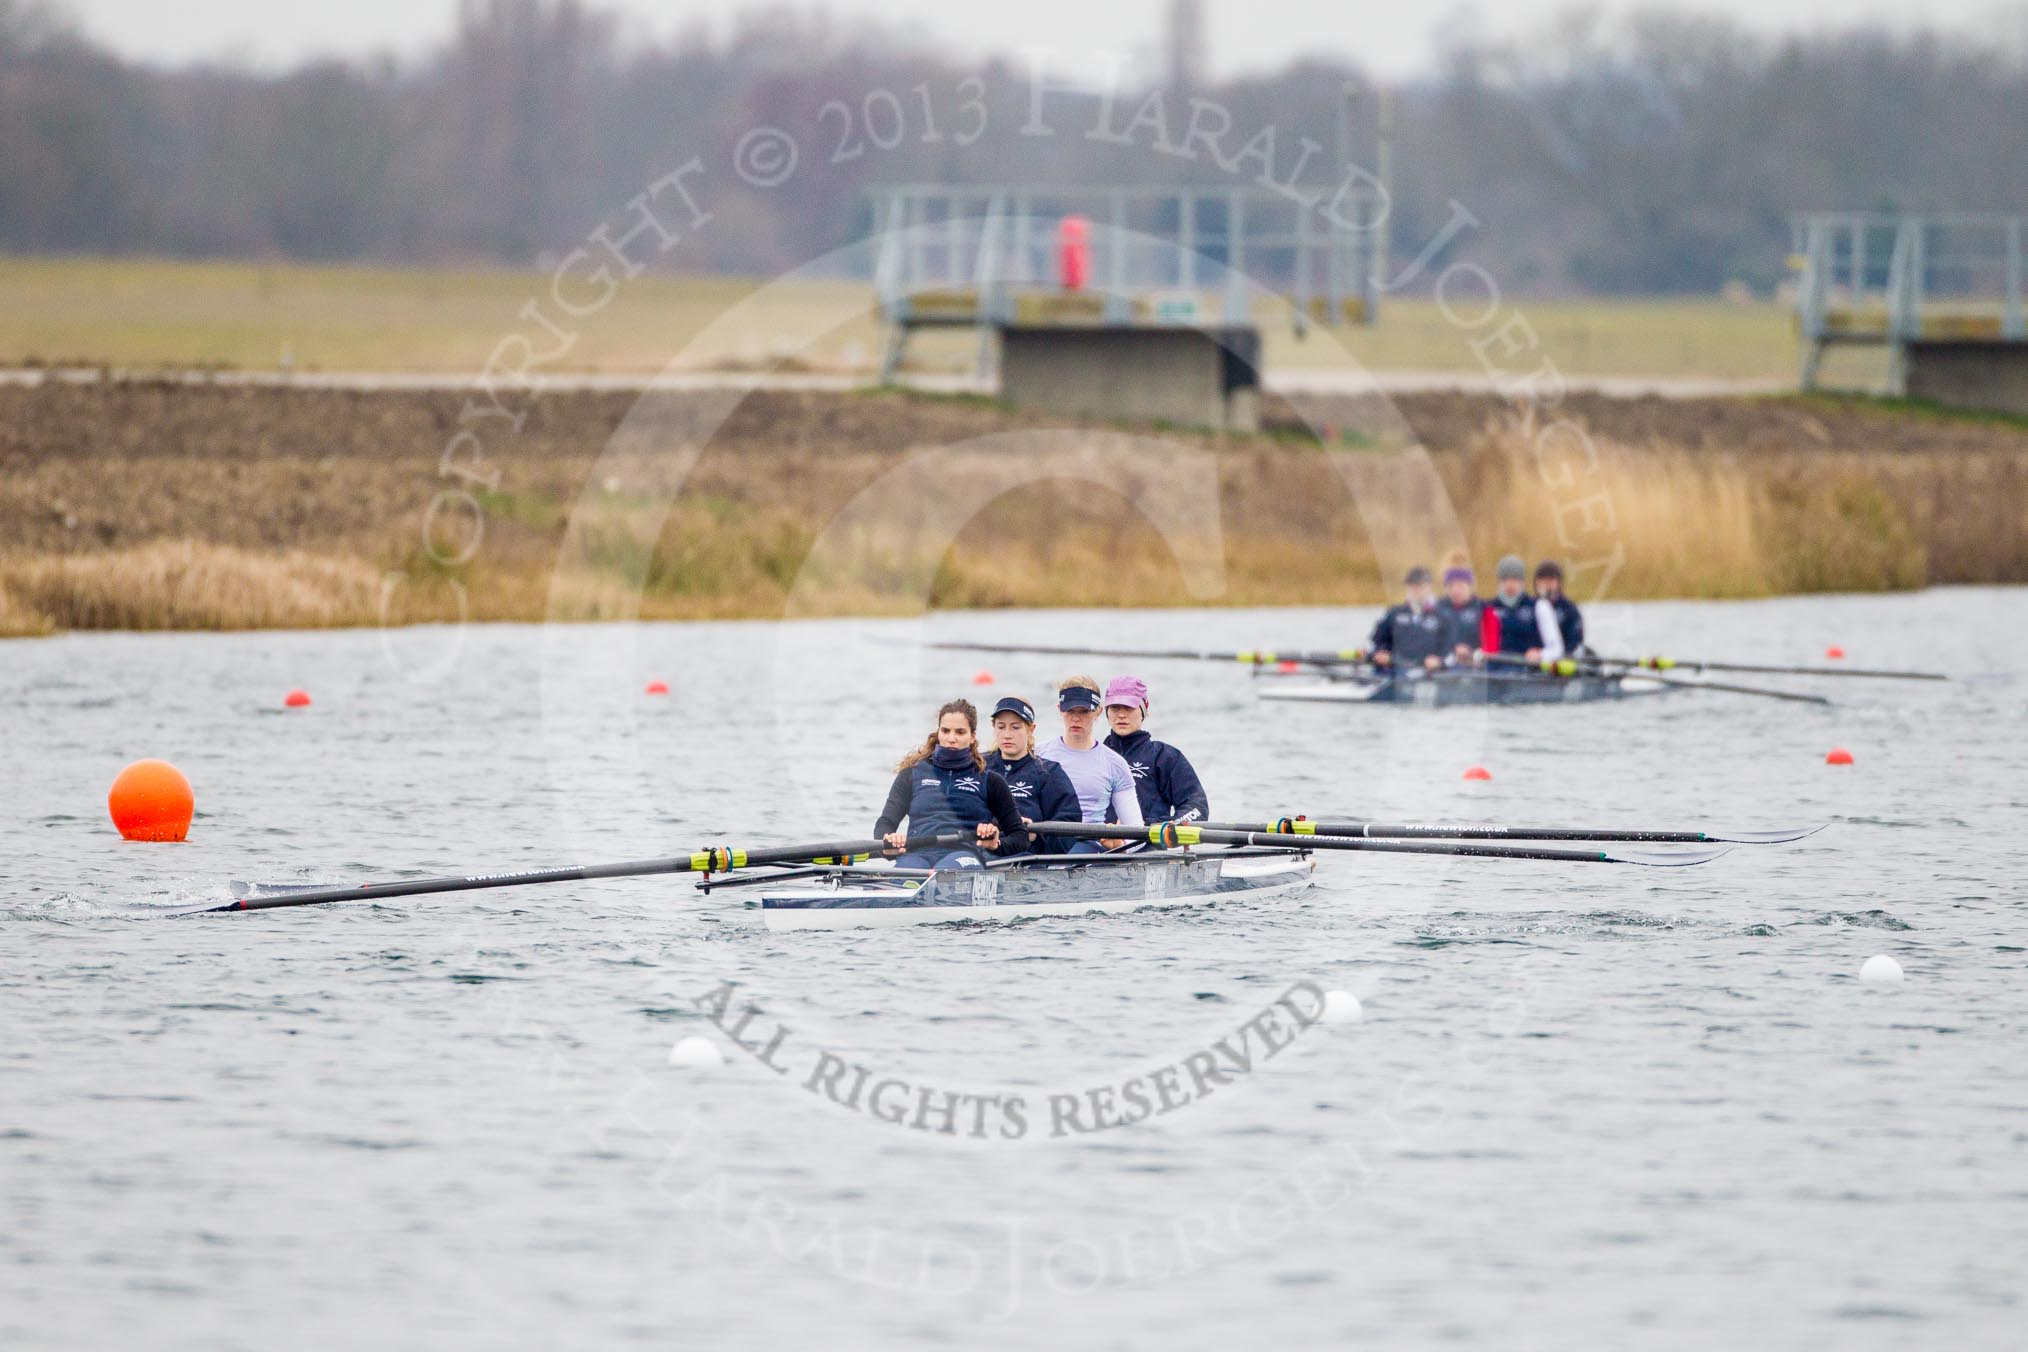 The Boat Race season 2013 - fixture OUWBC vs Molesey BC: Two of OUWBC's coxed fours - Coralie Viollet-Djelassi, Eleanor Darlington, Maria Mazza, Caitlin Goss andcox Sonya Milanova, and in the boat in the background Hannah Ledbury , Emily Chittock, Rachel Purkess, bow Elspeth Cumber and cox Olivia Cleary..
Dorney Lake,
Dorney, Windsor,
Berkshire,
United Kingdom,
on 24 February 2013 at 10:05, image #7